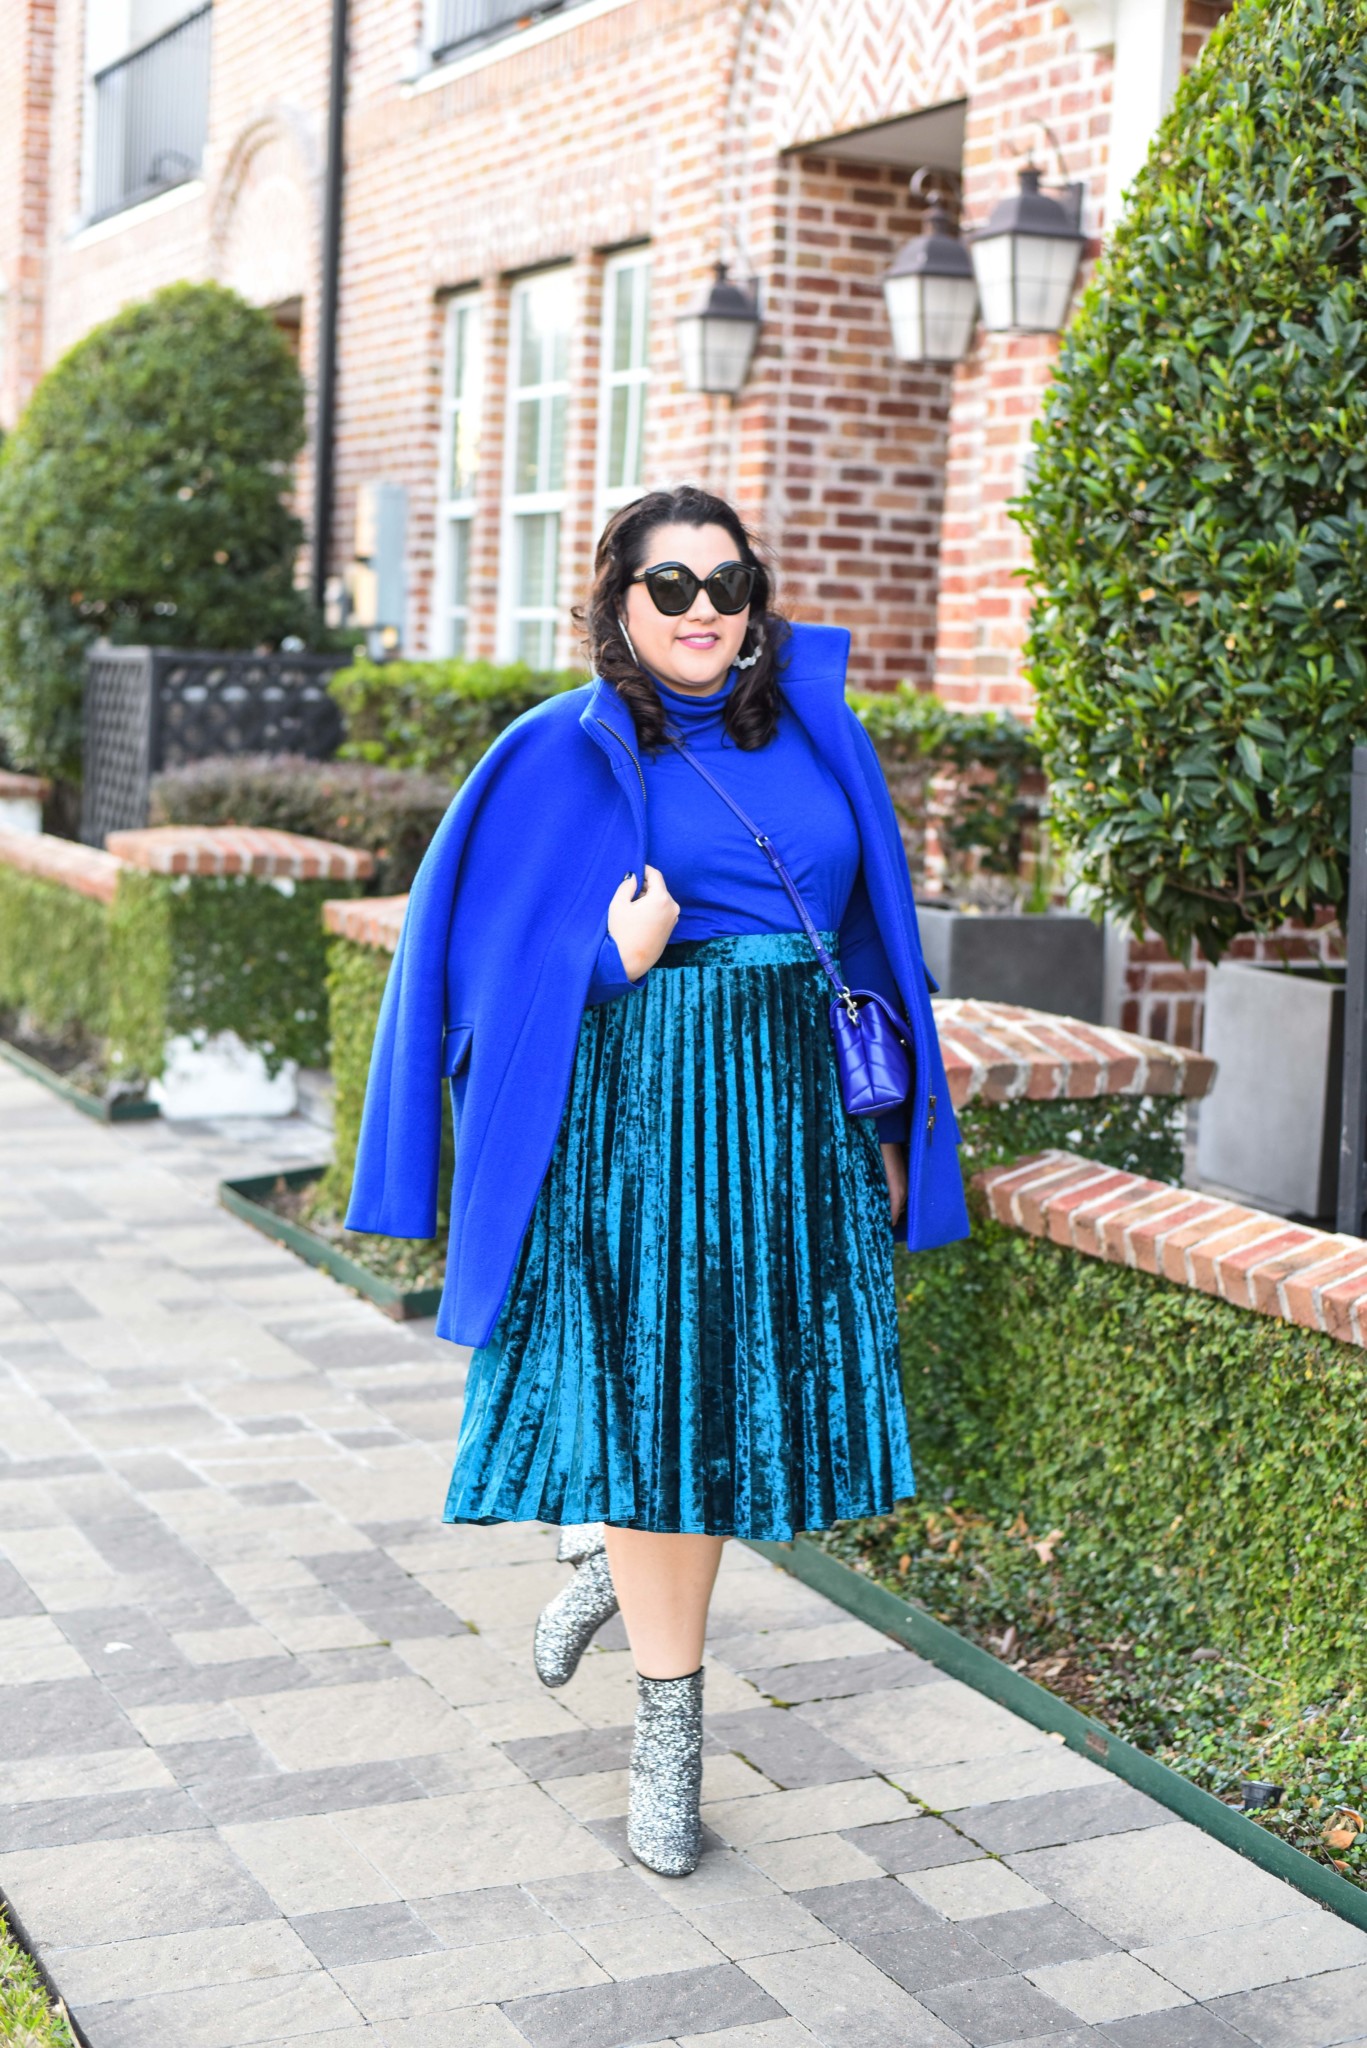 Wearing all blue and taking advantage of the monochromatic trend